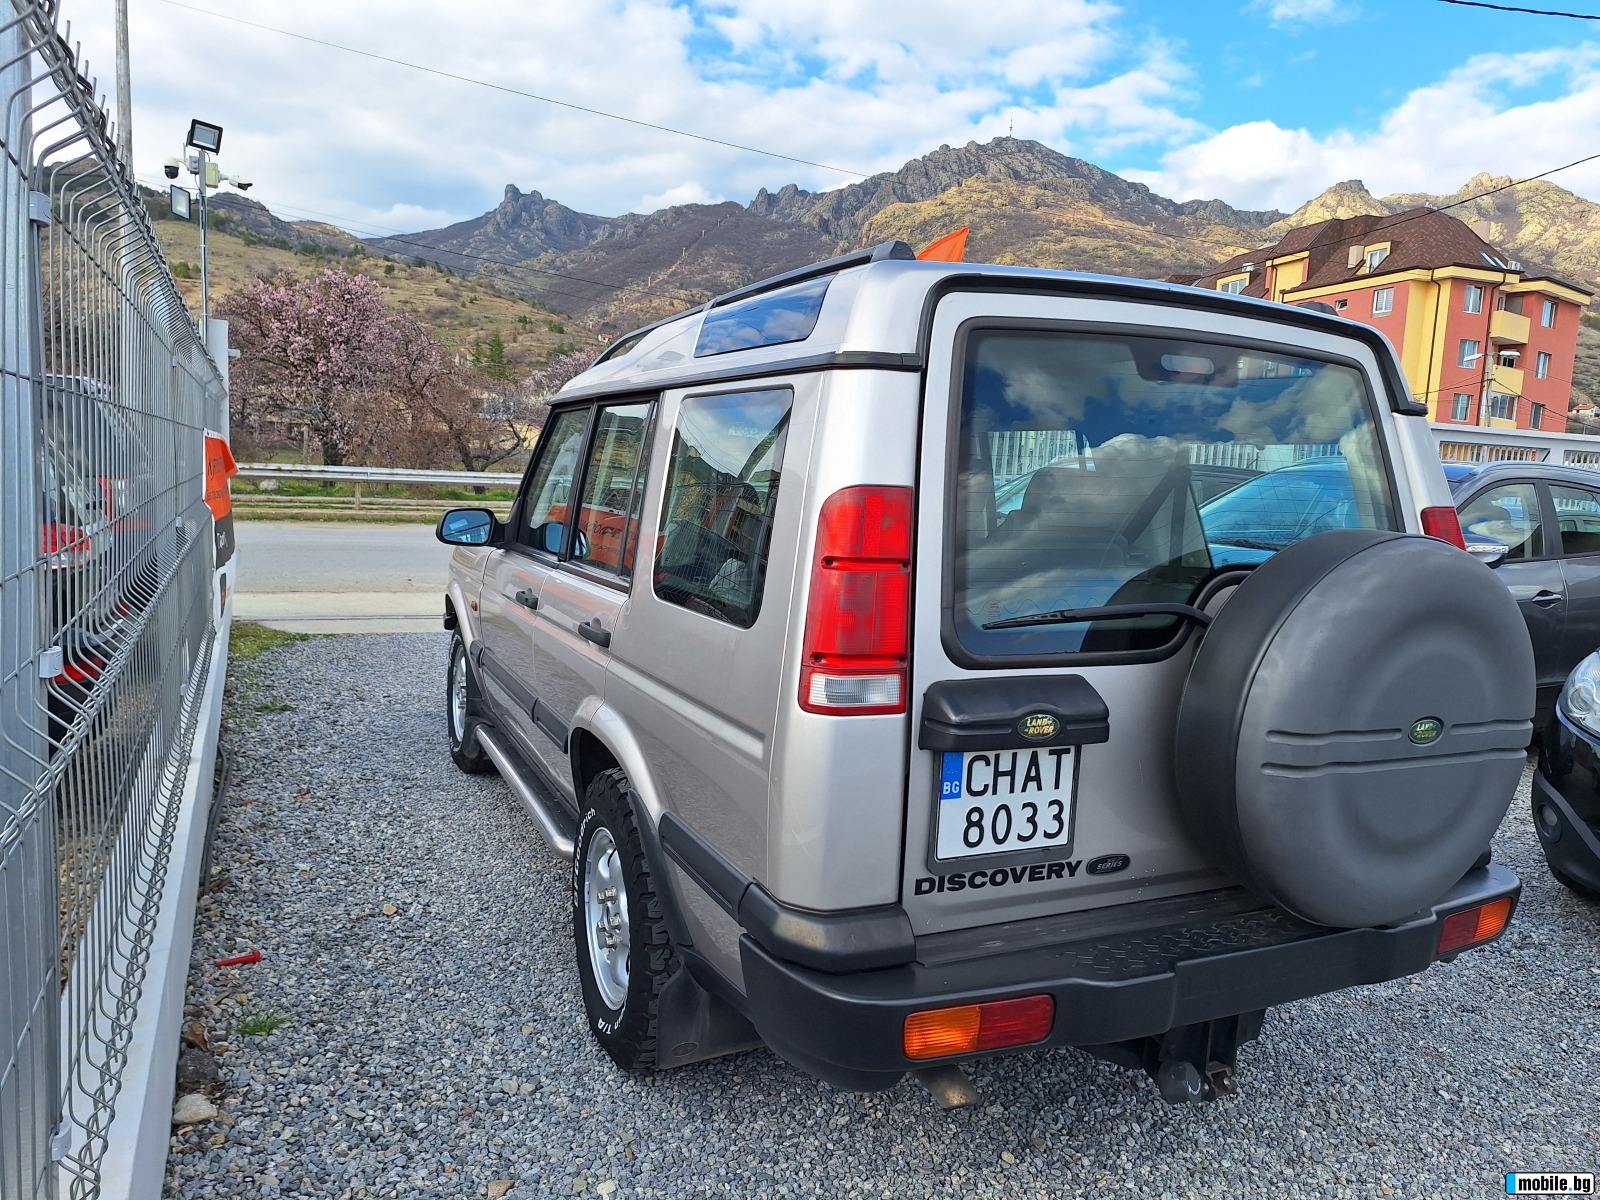 Land Rover Discovery 2.5 TDI    | Mobile.bg   6